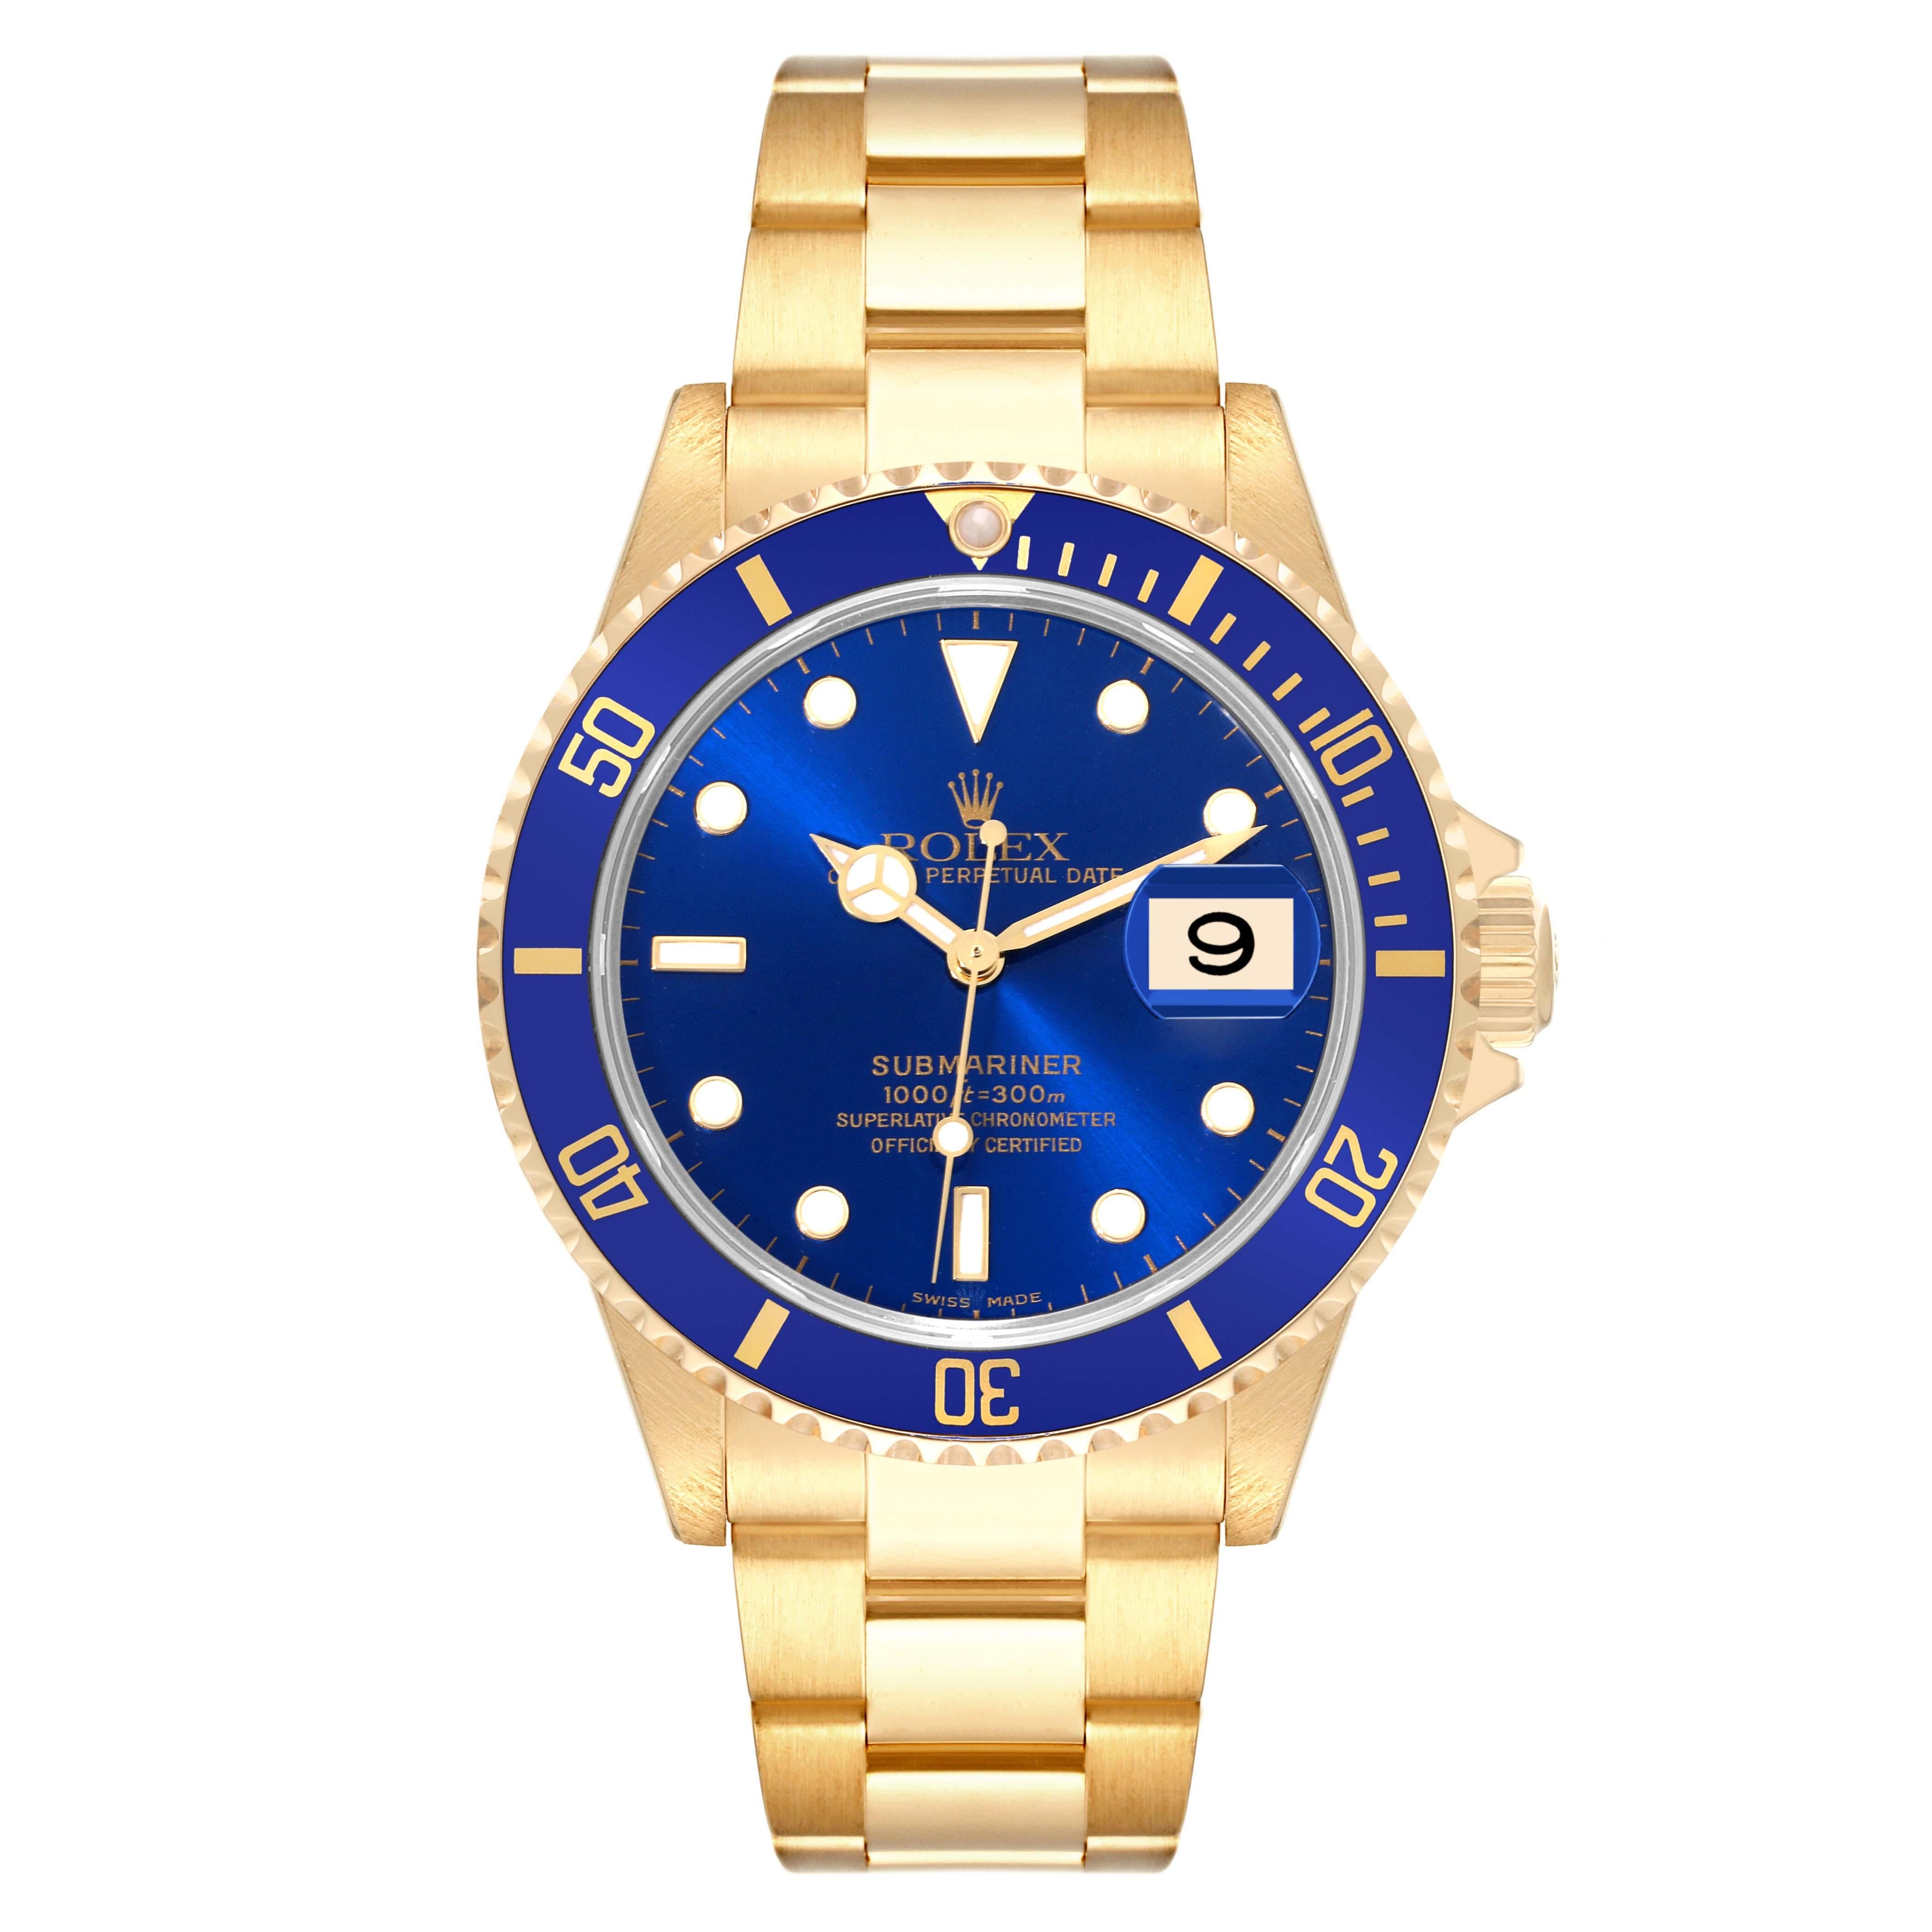 Rolex Submariner Yellow Gold Blue Dial 40mm Mens Watch 16618. Officially certified chronometer automatic self-winding movement. 18k yellow gold case 40.0 mm in diameter. Rolex logo on a crown. Blue insert special time-lapse unidirectional rotating